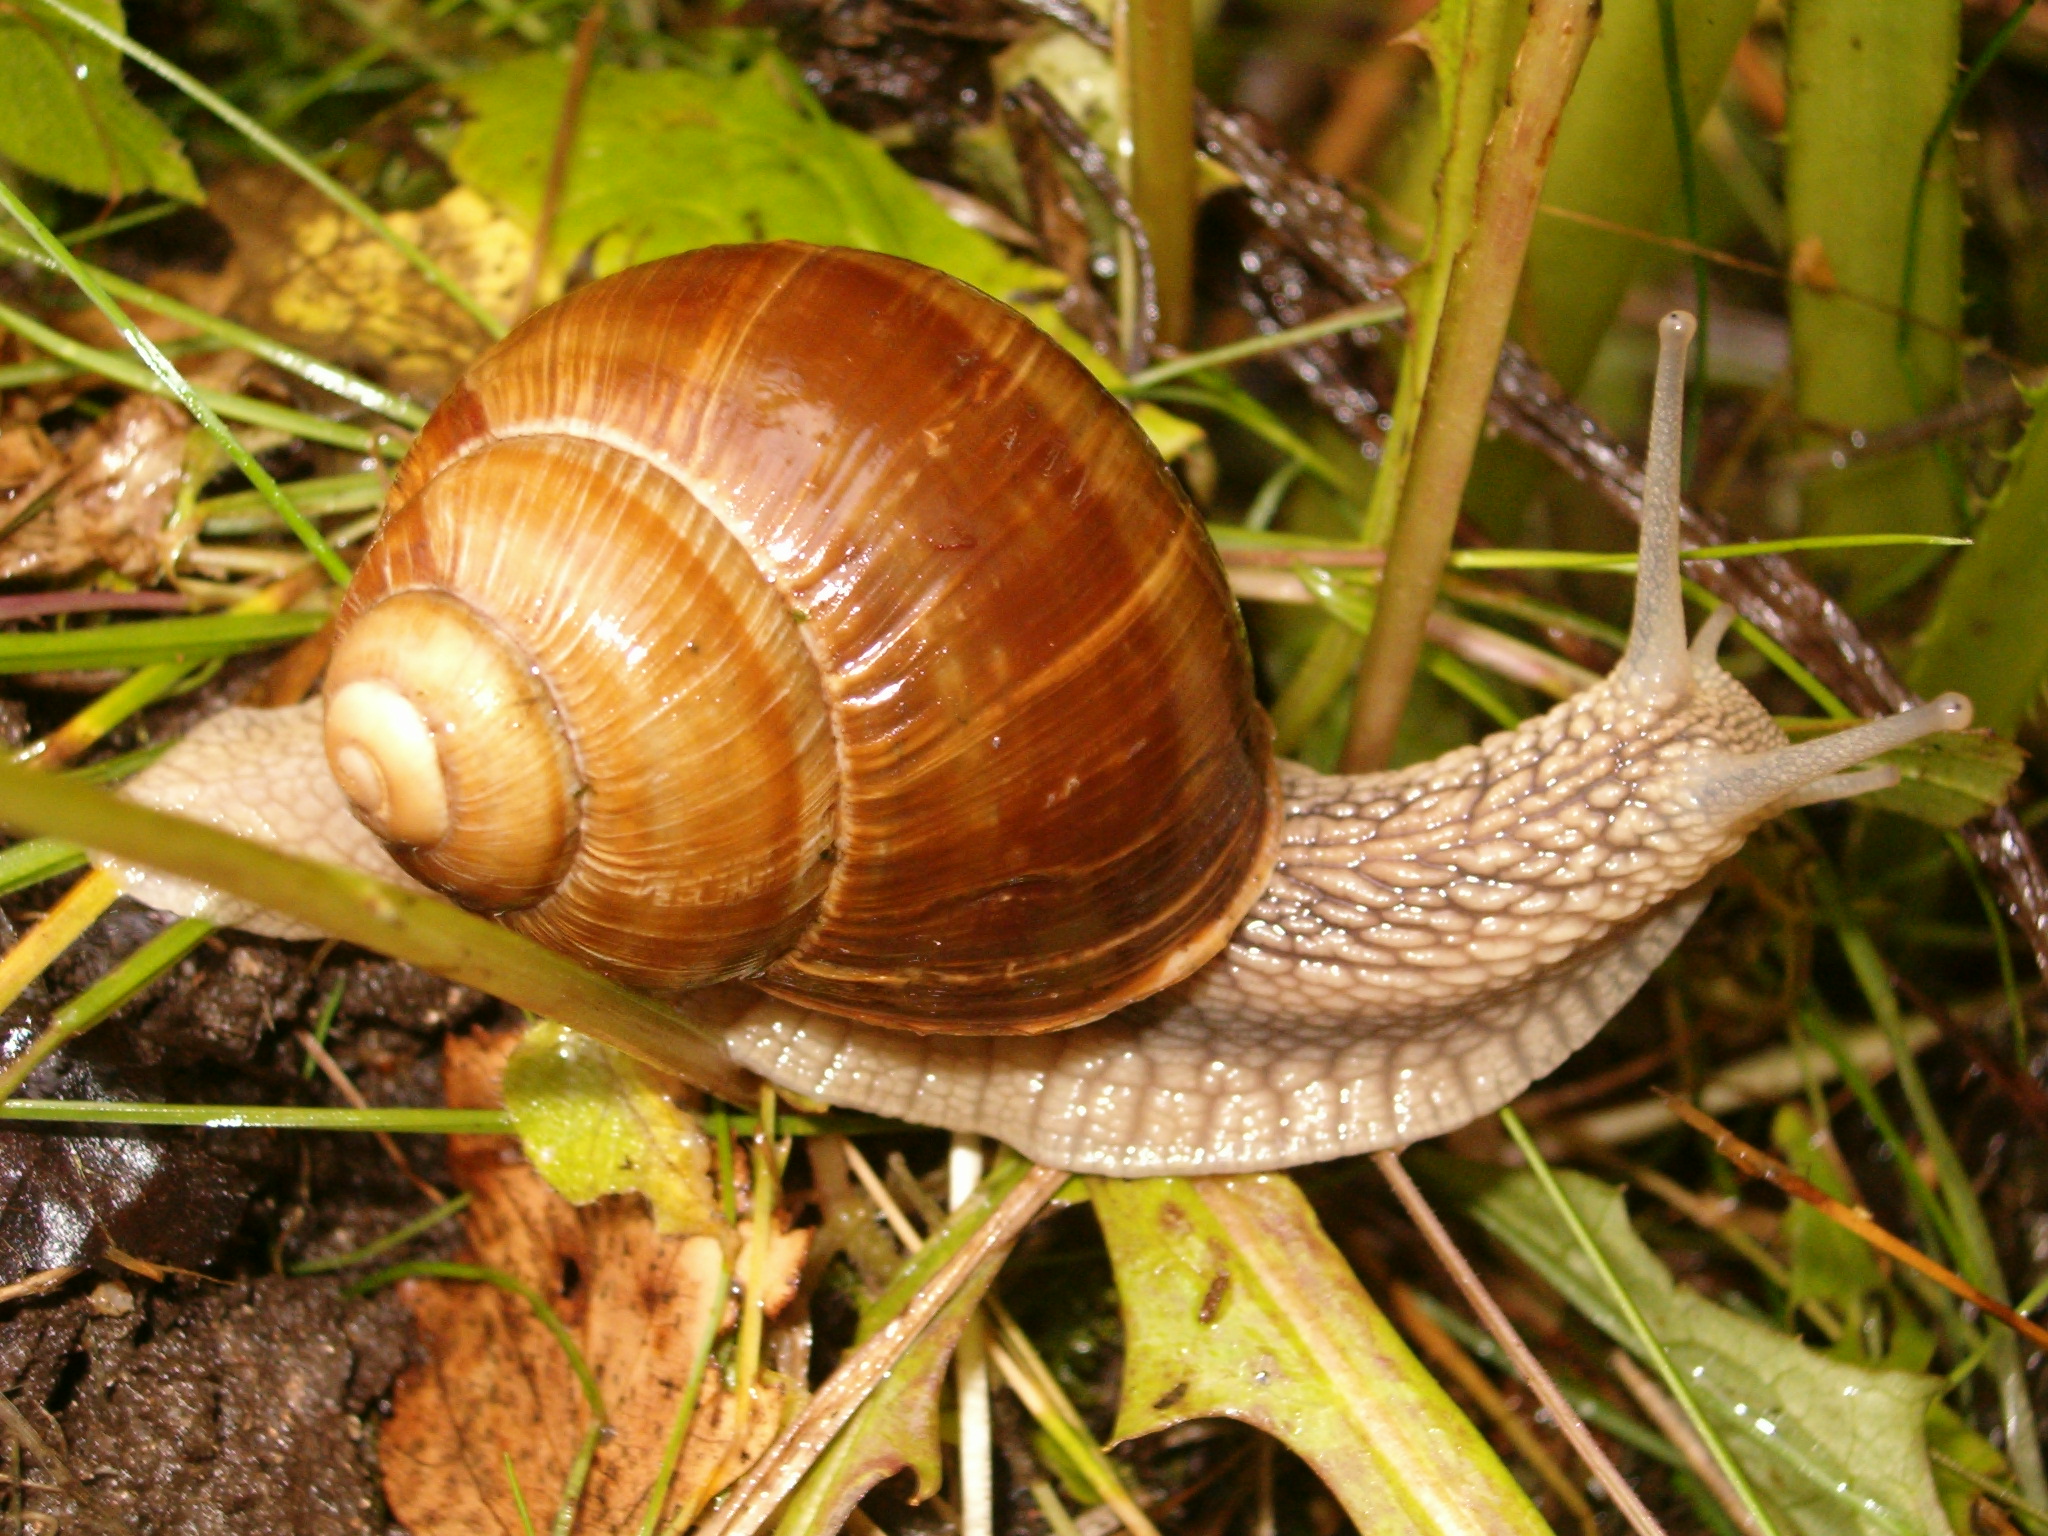 a snail is walking through the grass and weeds